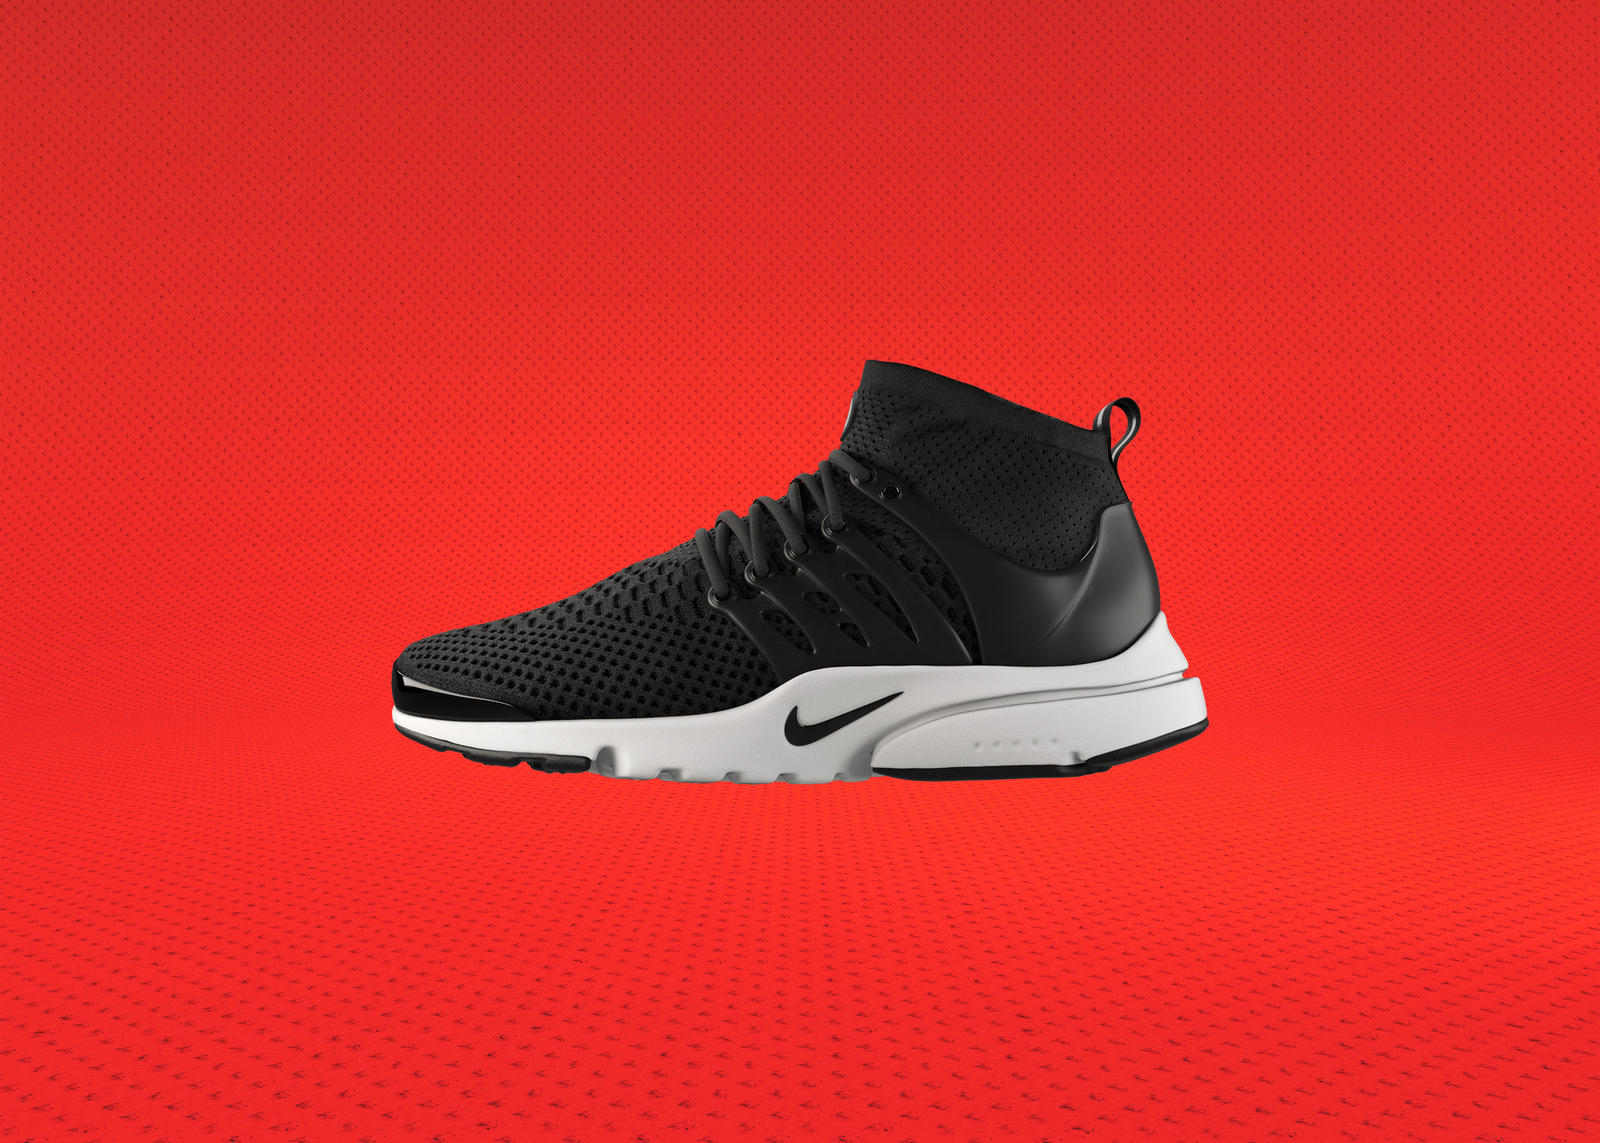 The Nike Air Presto Gets Updated with 